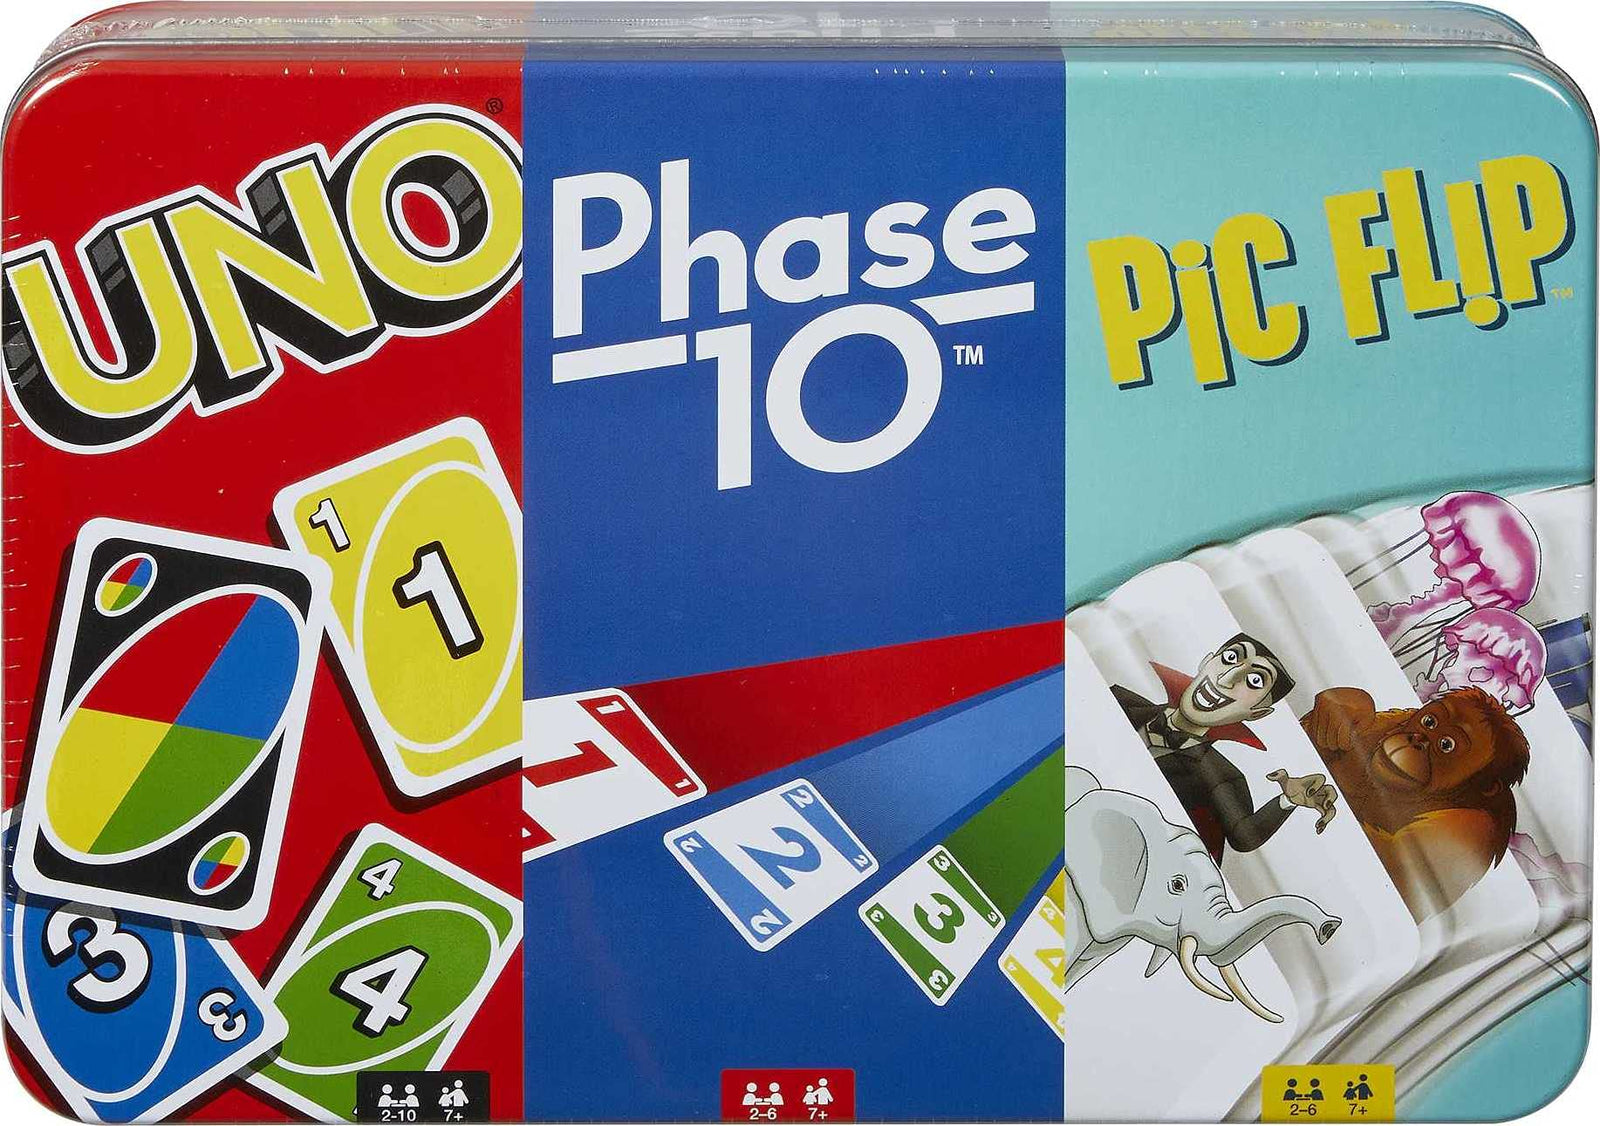 Mattel UNO, Phase 10 and Pic Flip Bundle Tin, 3 Card Games for Players 7 Year Olds & Up, Decorative Storage Tin, Gift for Kid, Family & Adult Game Night 7 Years & Older